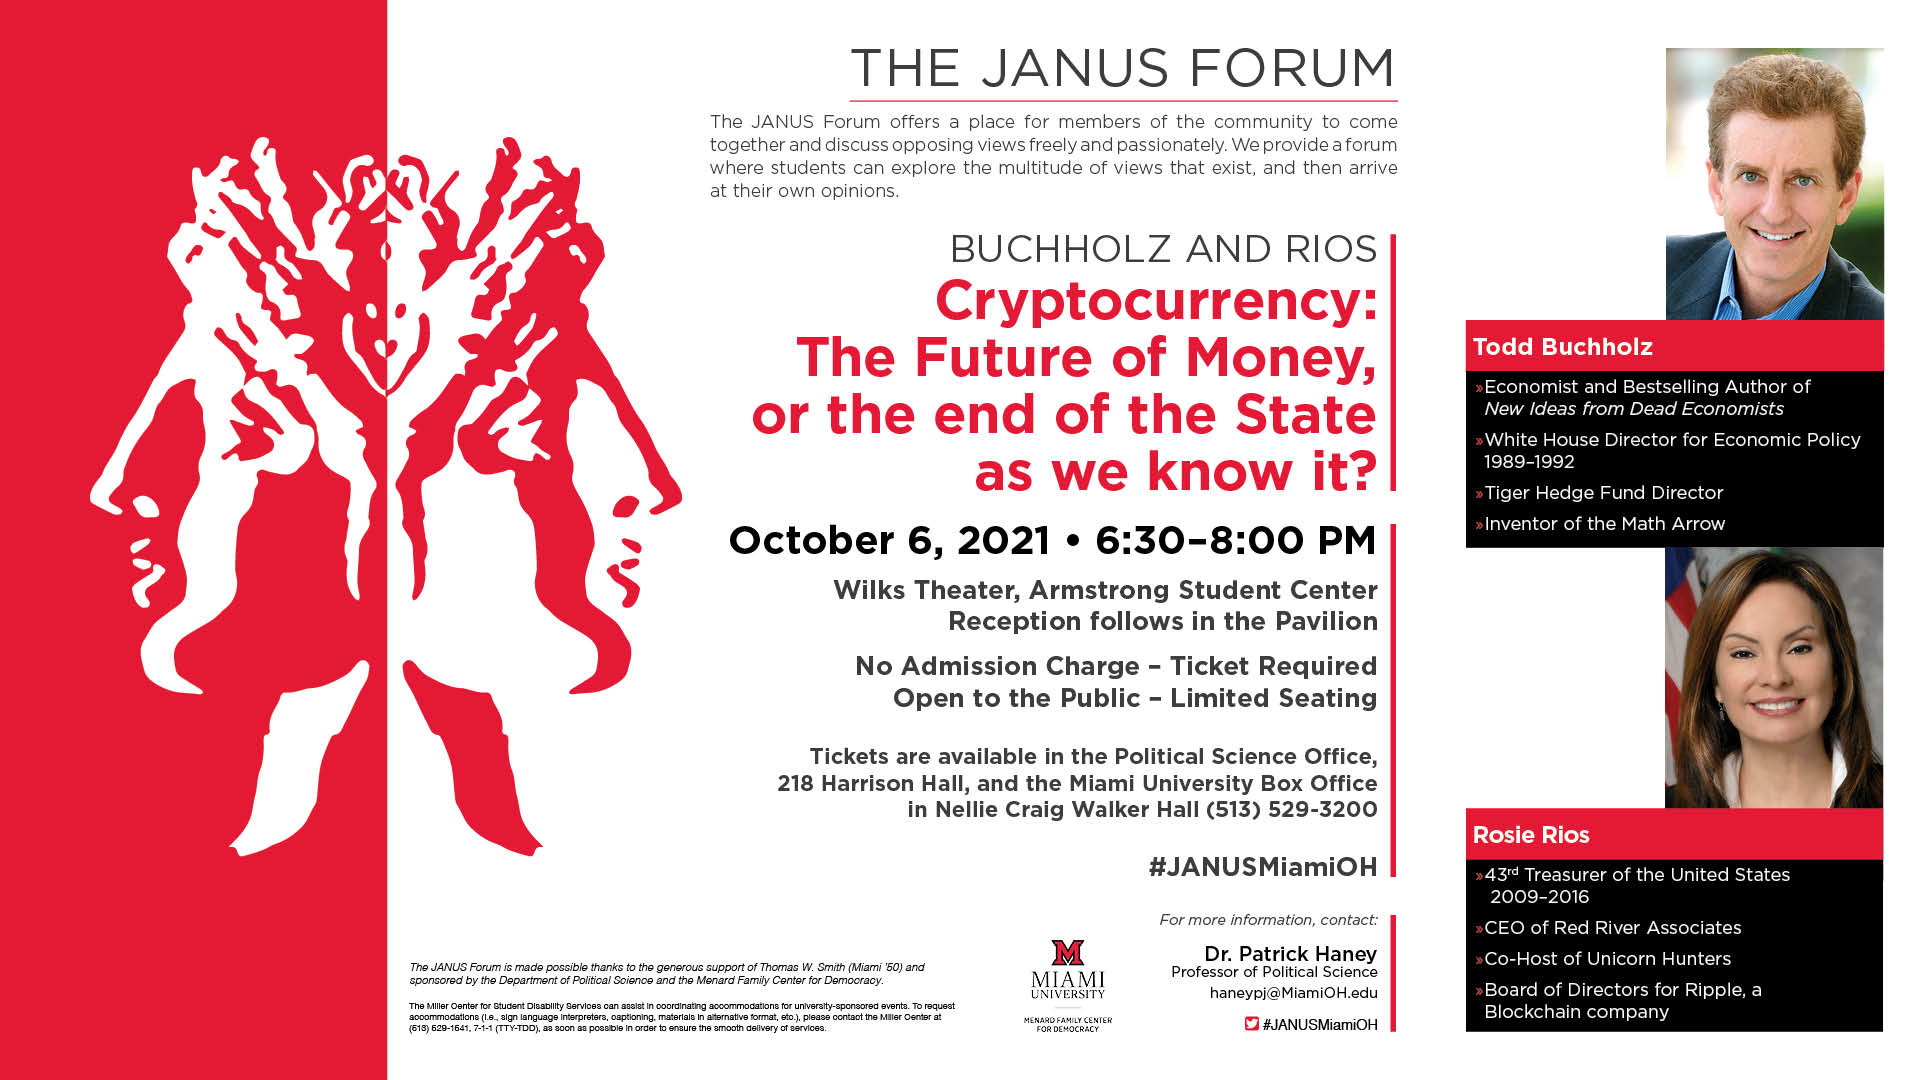 Image for the Janus Forum event held in fall 2021